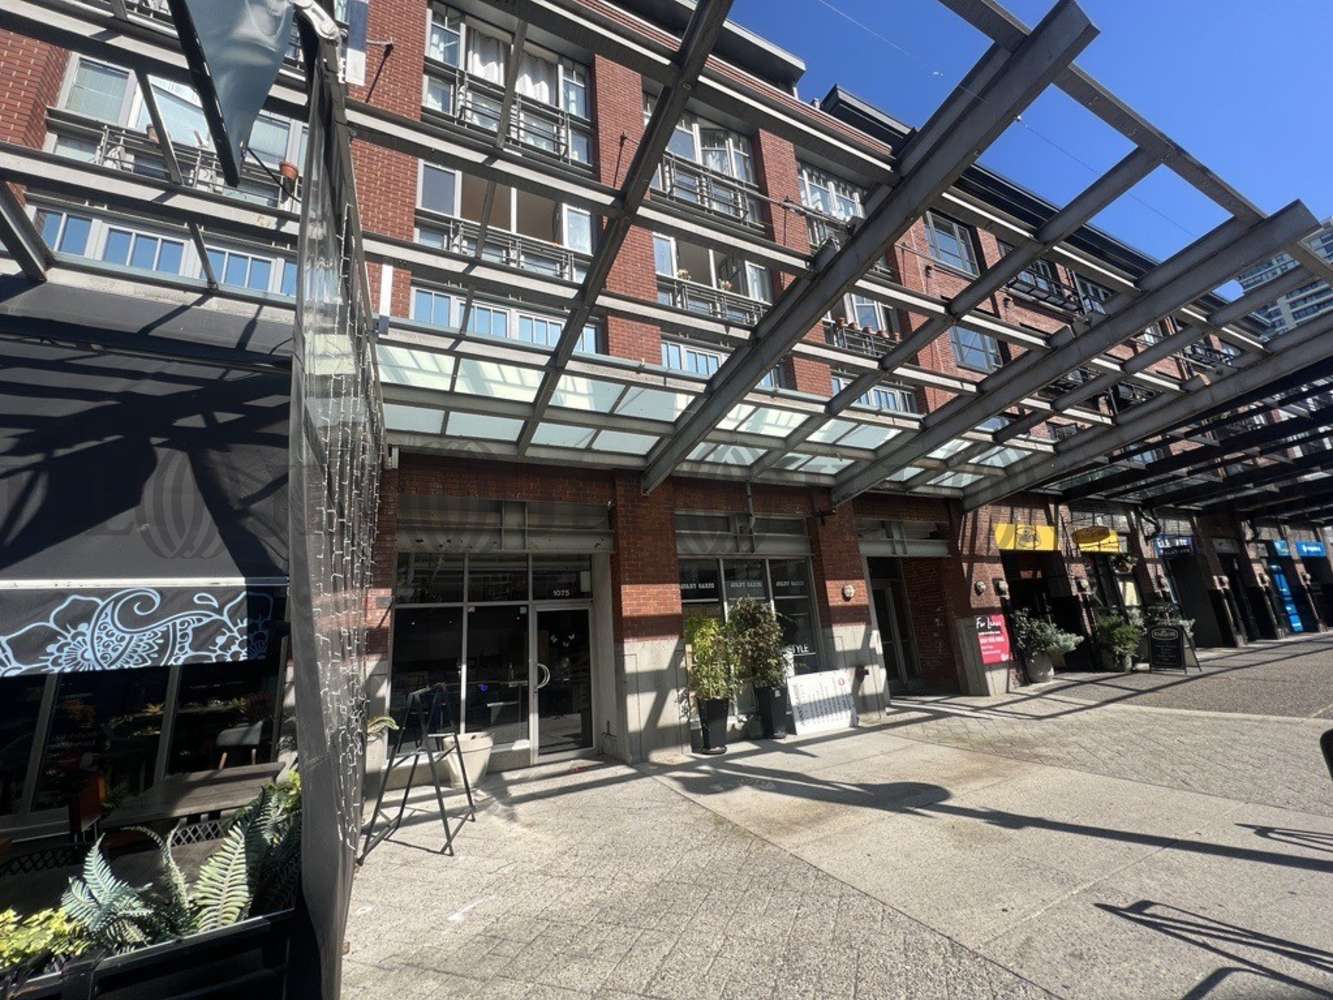 Retail Vancouver, V6B 2T4 - Yaletown Retail Opportunity